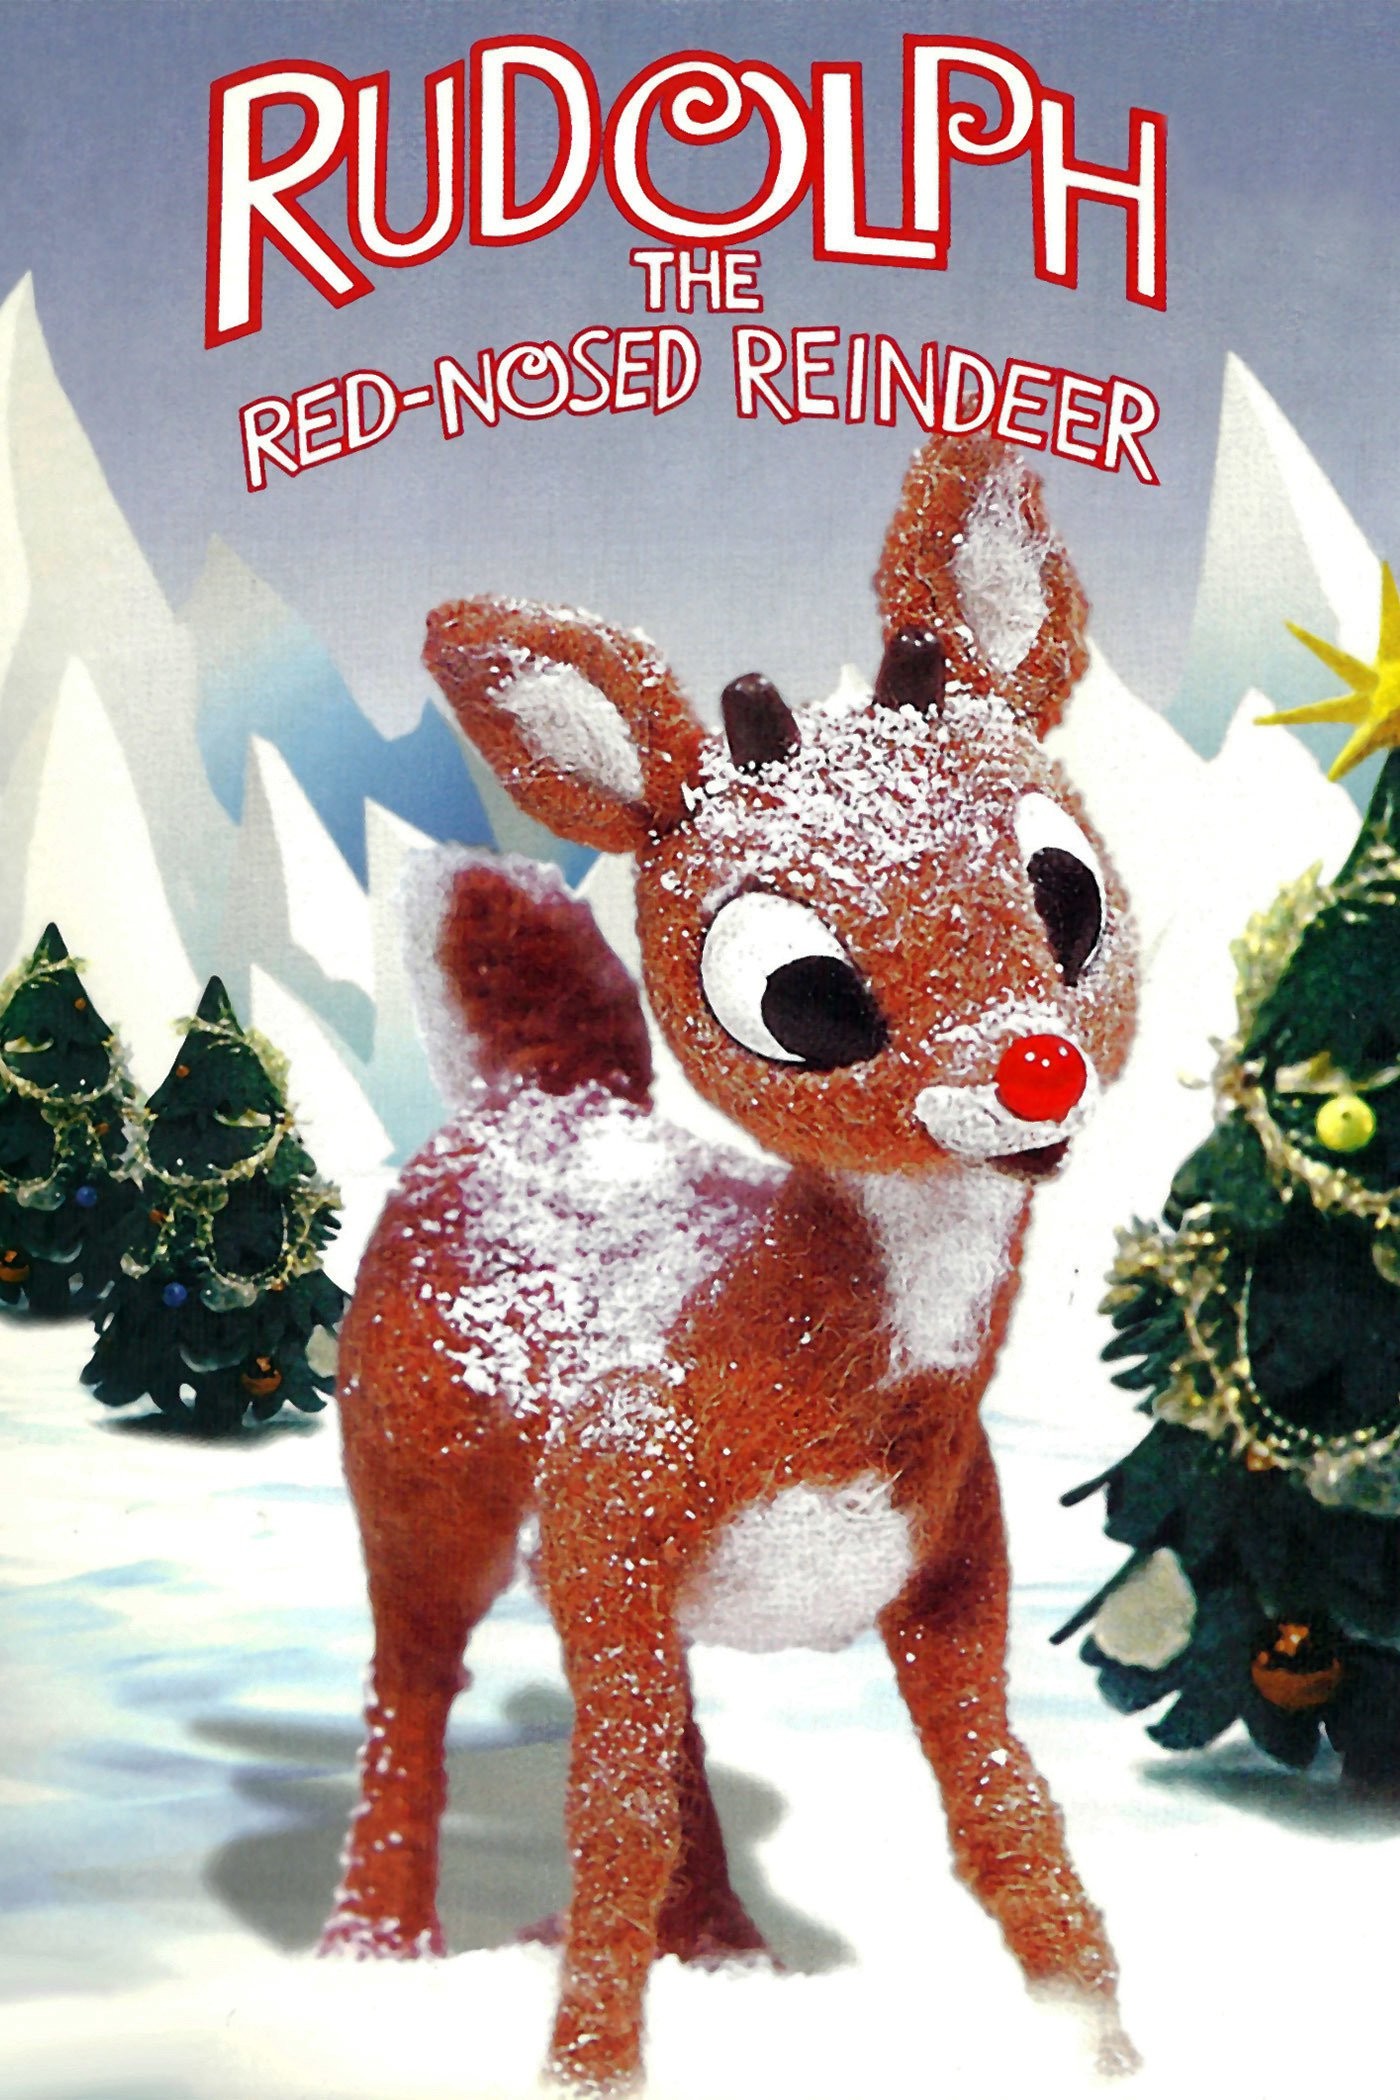 Rudolph the RedNosed Reindeer Movie Reviews